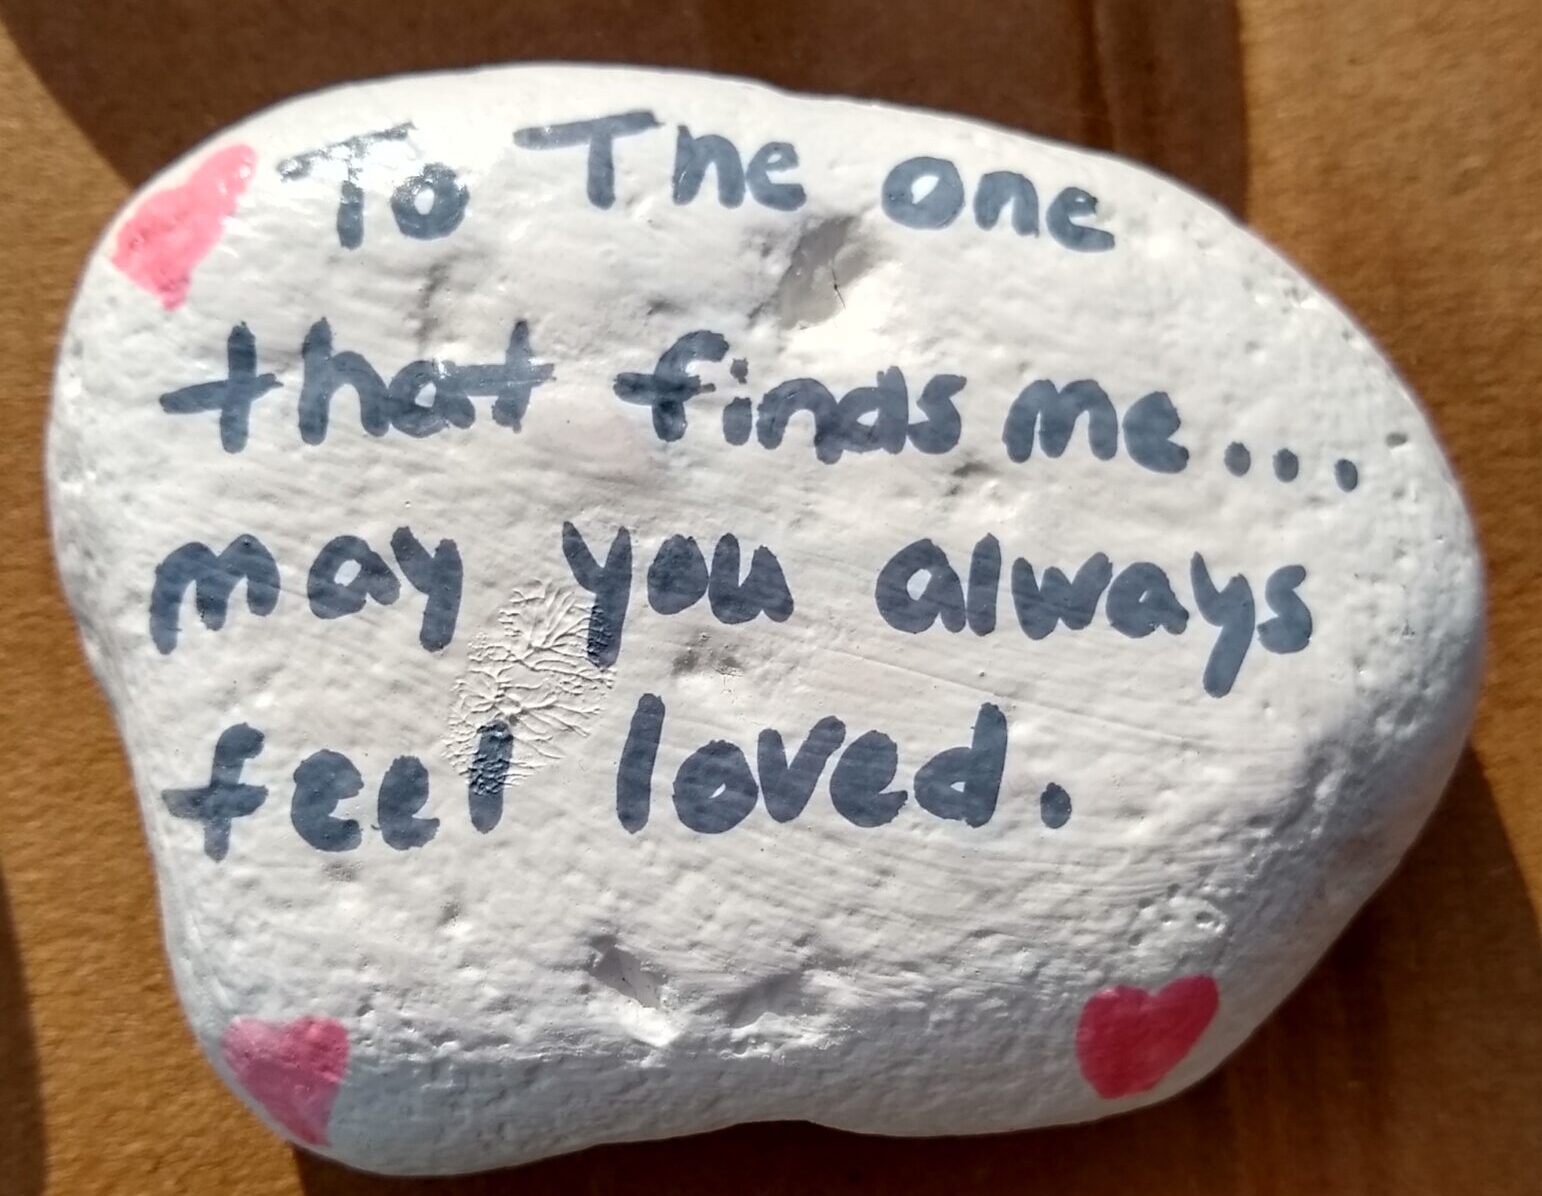 Rock painted white that says, "To the one who finds me, may you always feel loved." with pink and red hearts